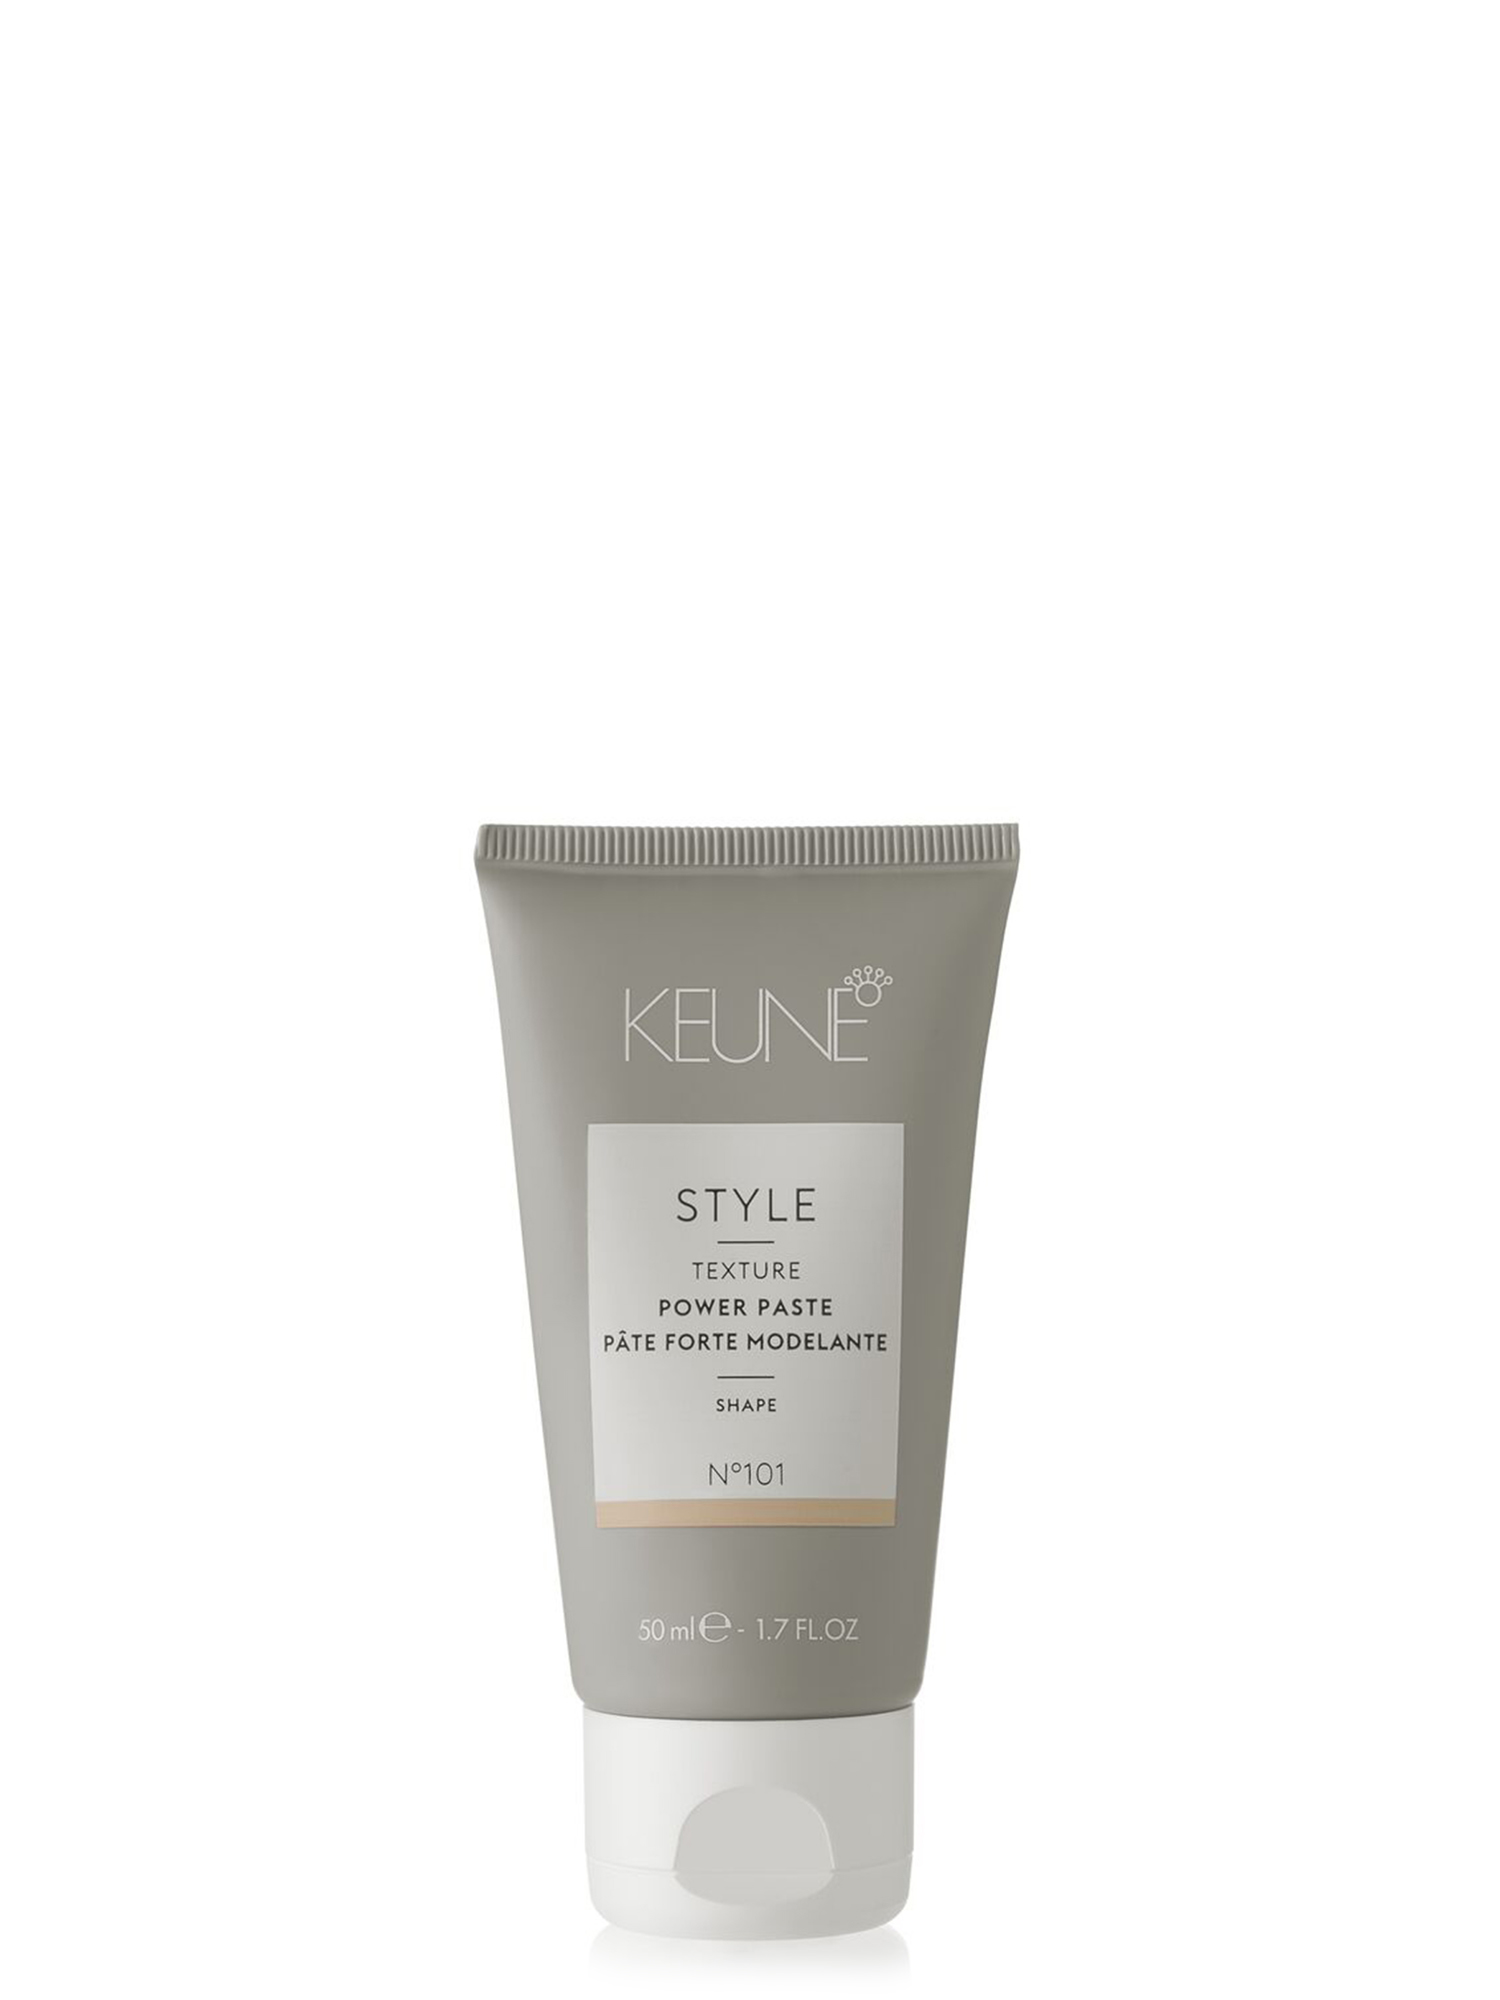 STYLE POWER PASTE is a hair product with an extremely matte finish. It offers maximum hold, is water-resistant, and suitable for all hair types. Now available on keune.ch.